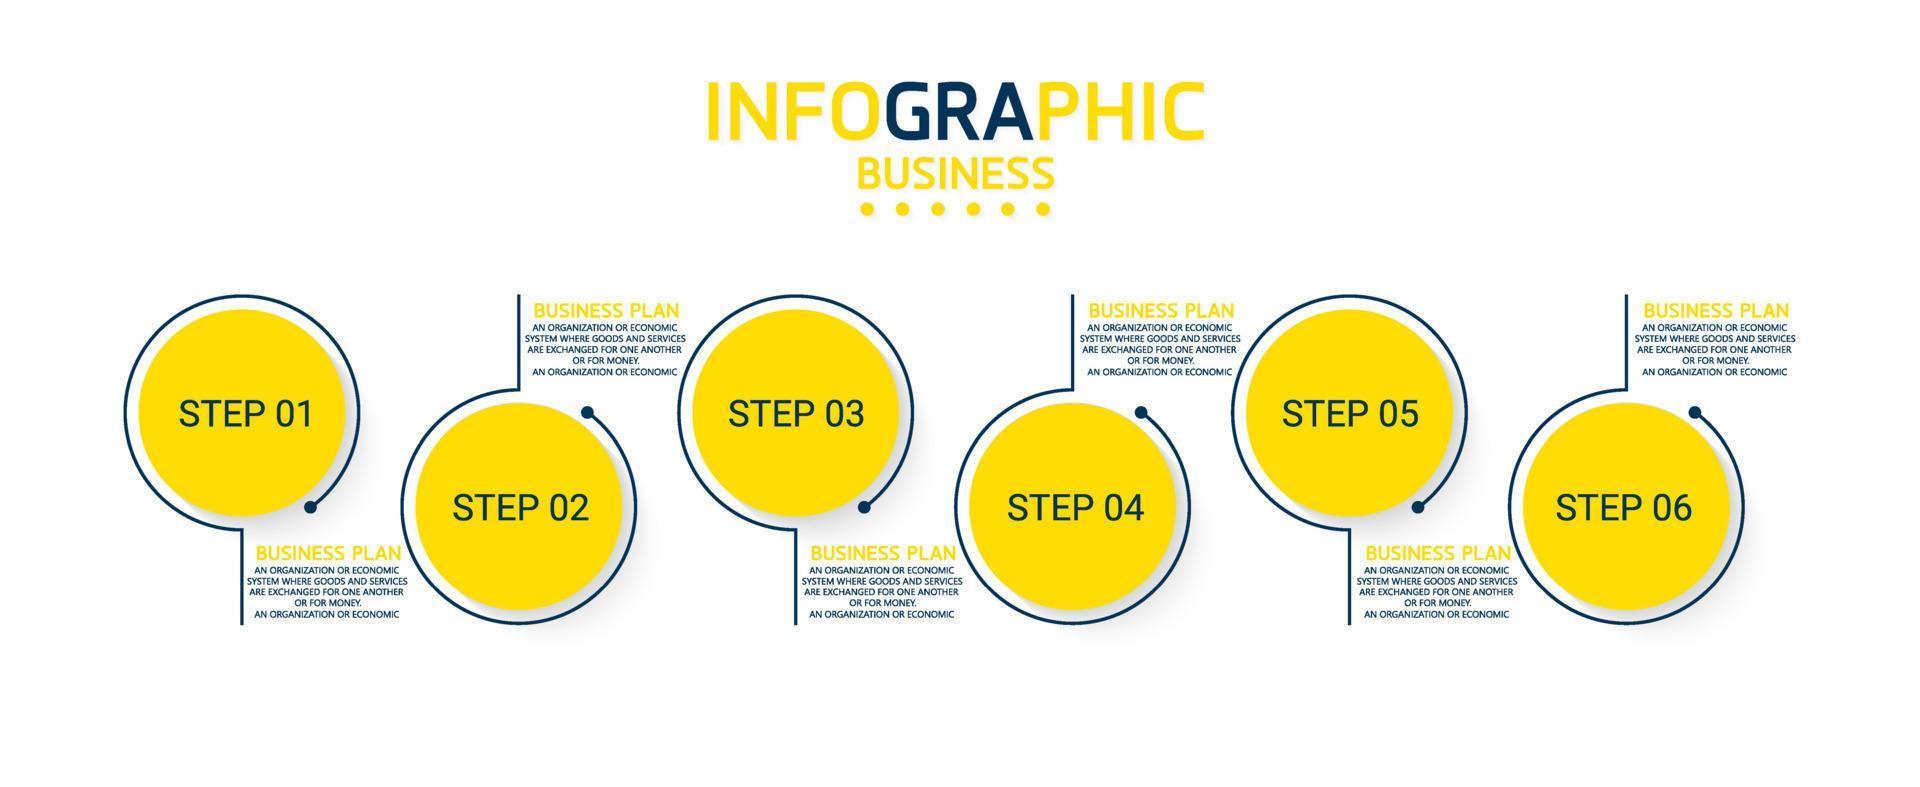 timeline infographic template Presentation business idea with icons, options or steps. infographics for business ideas Can be used for data graphics, flowcharts, websites, banners. vector